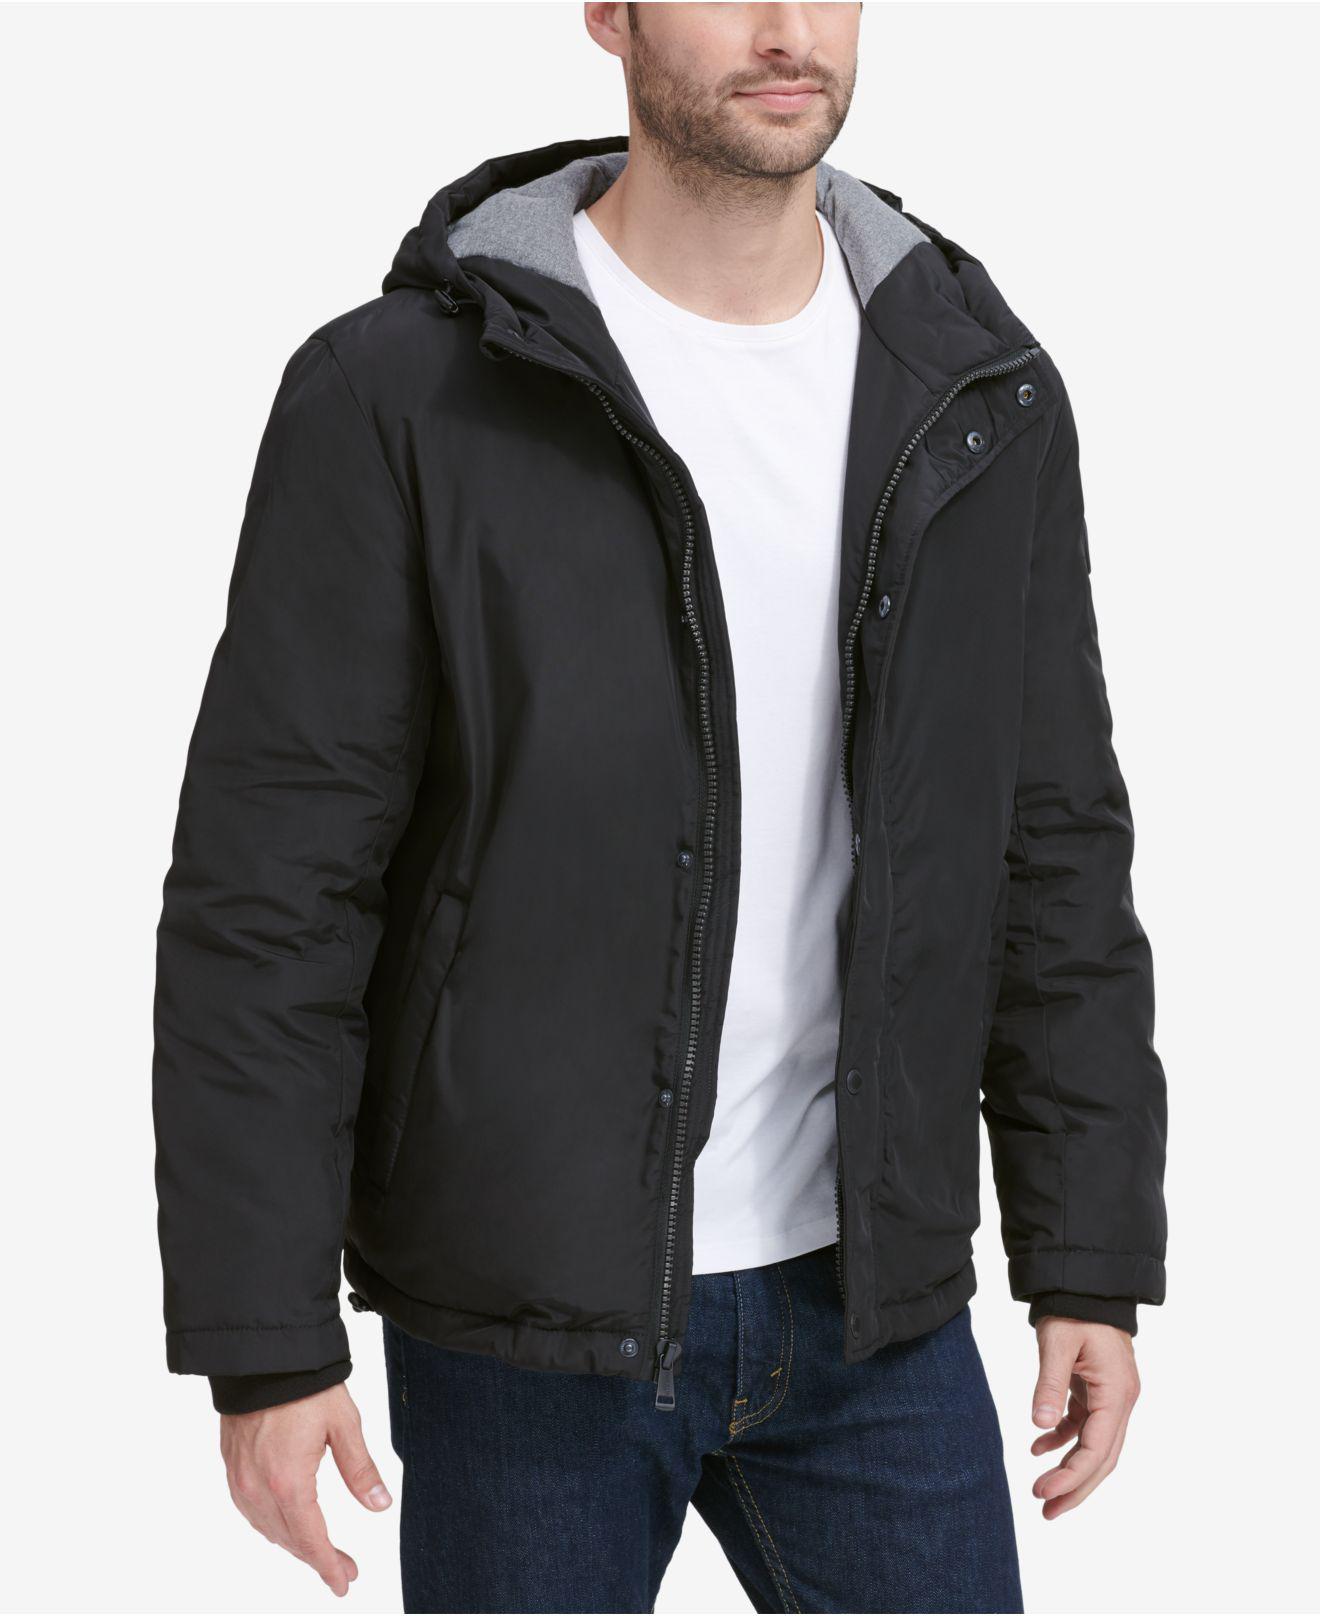 Cole Haan Synthetic Oxford Hooded Jacket in Black for Men - Lyst